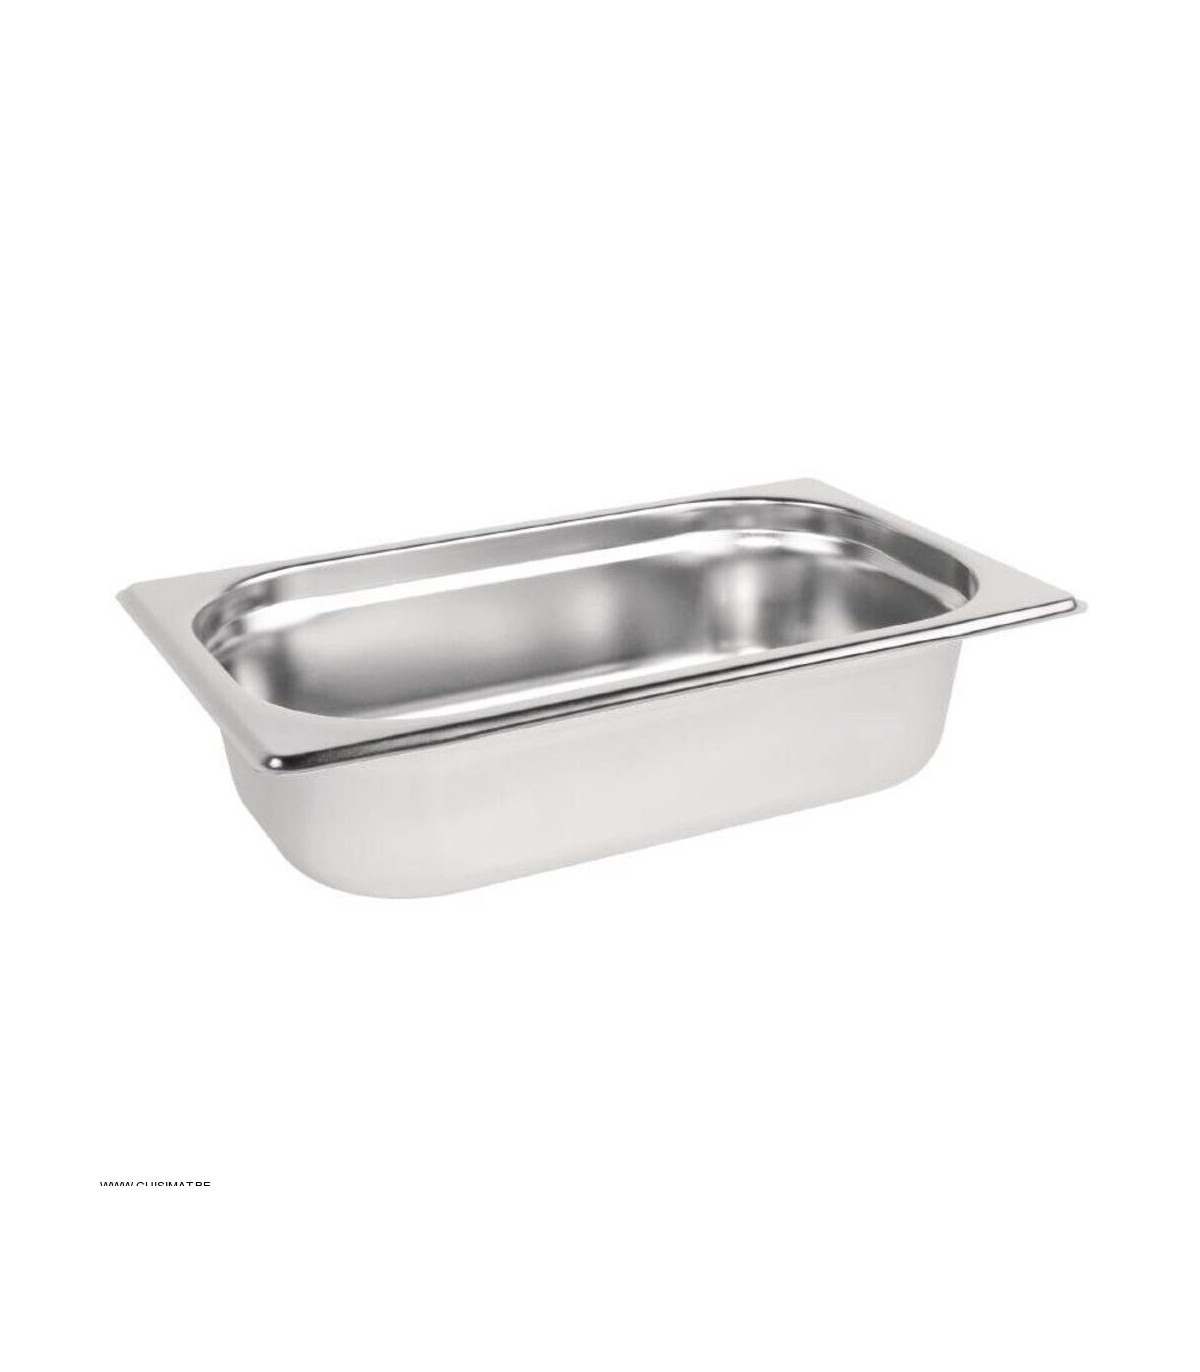 GN 1/4 (265  * 162MM) 65 MM VOGUE dans BACS GASTRONORM ANTI-ADHESIF